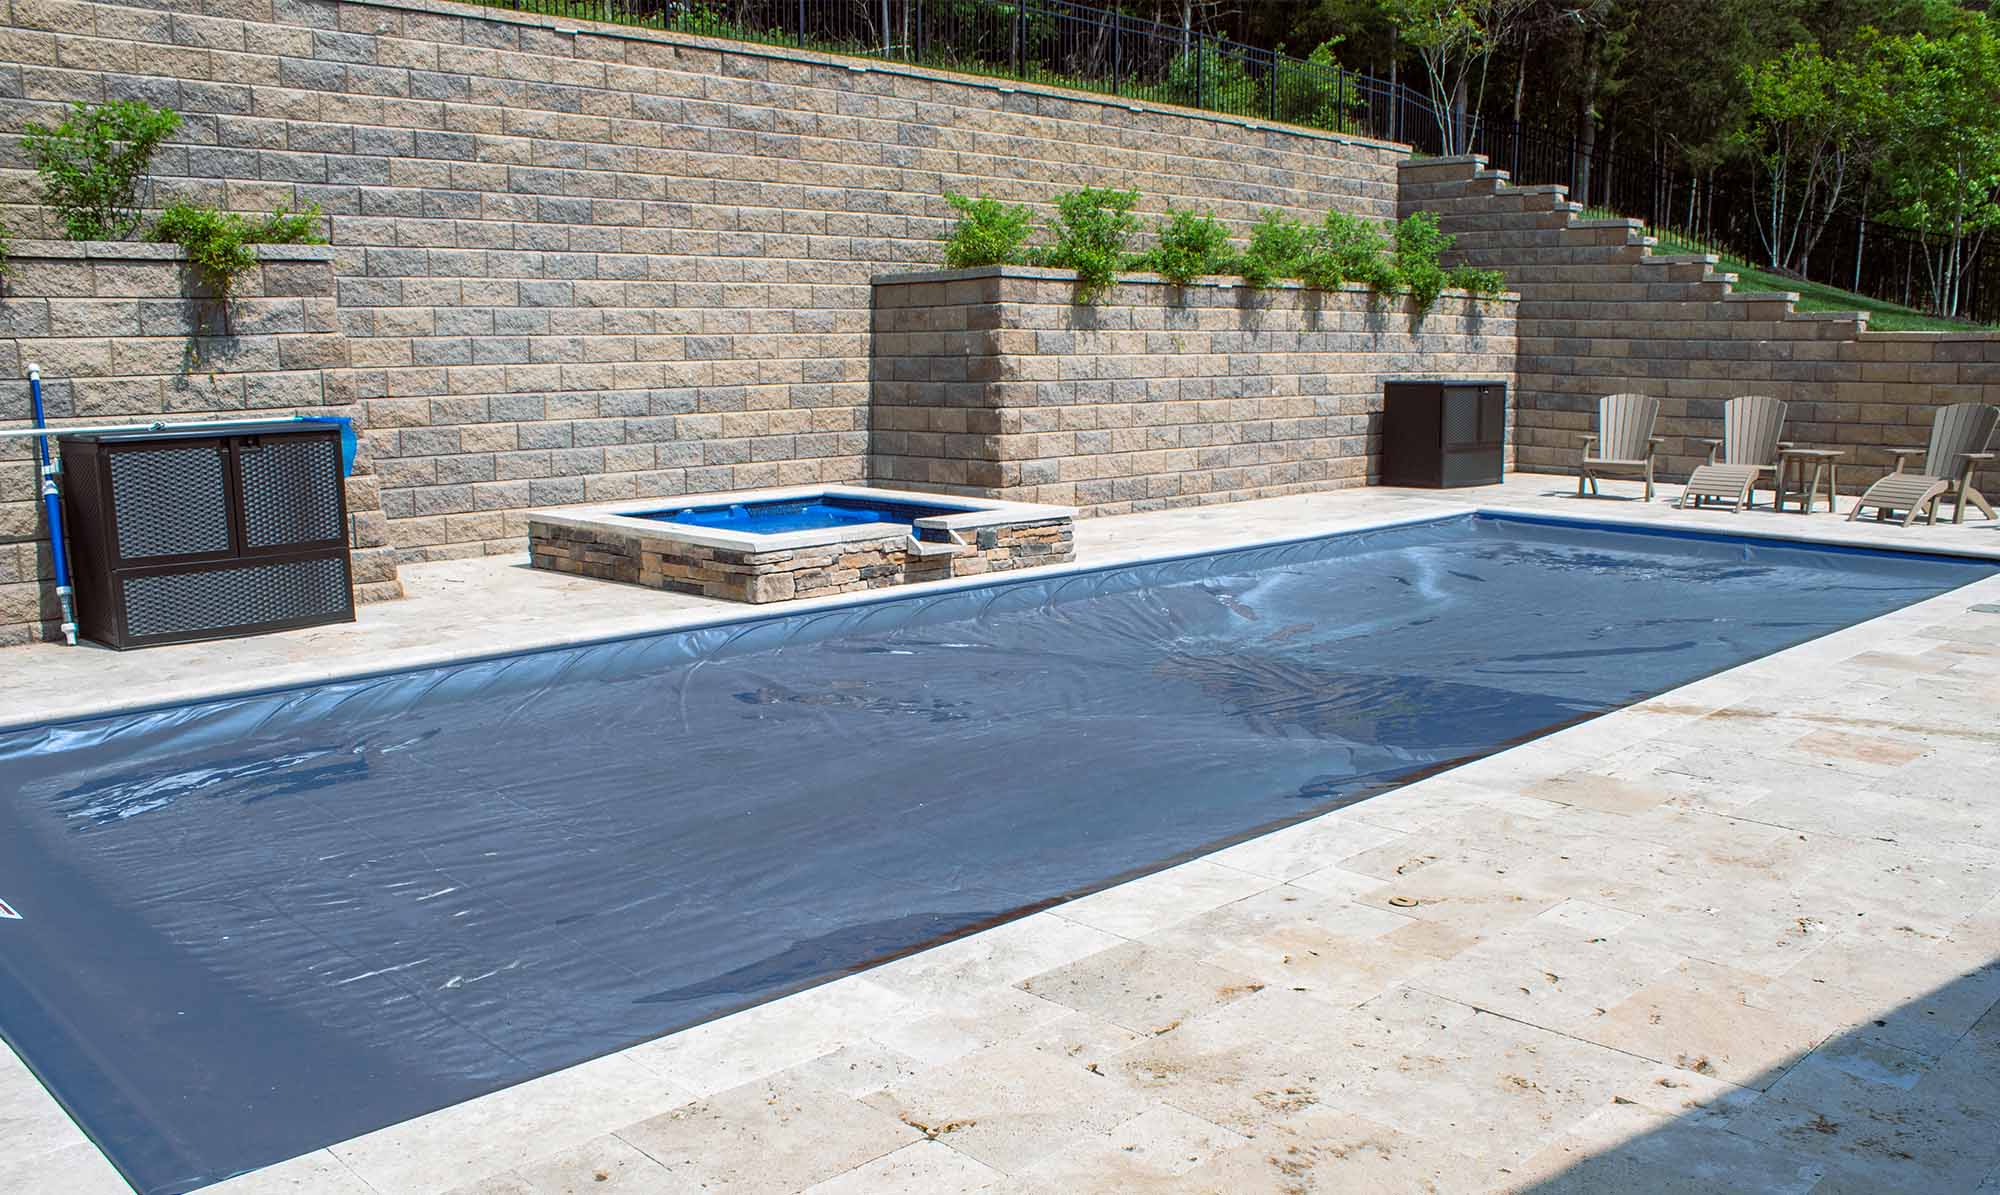 Automatic Swimming Pool Safety Covers can help protect your pool year round.